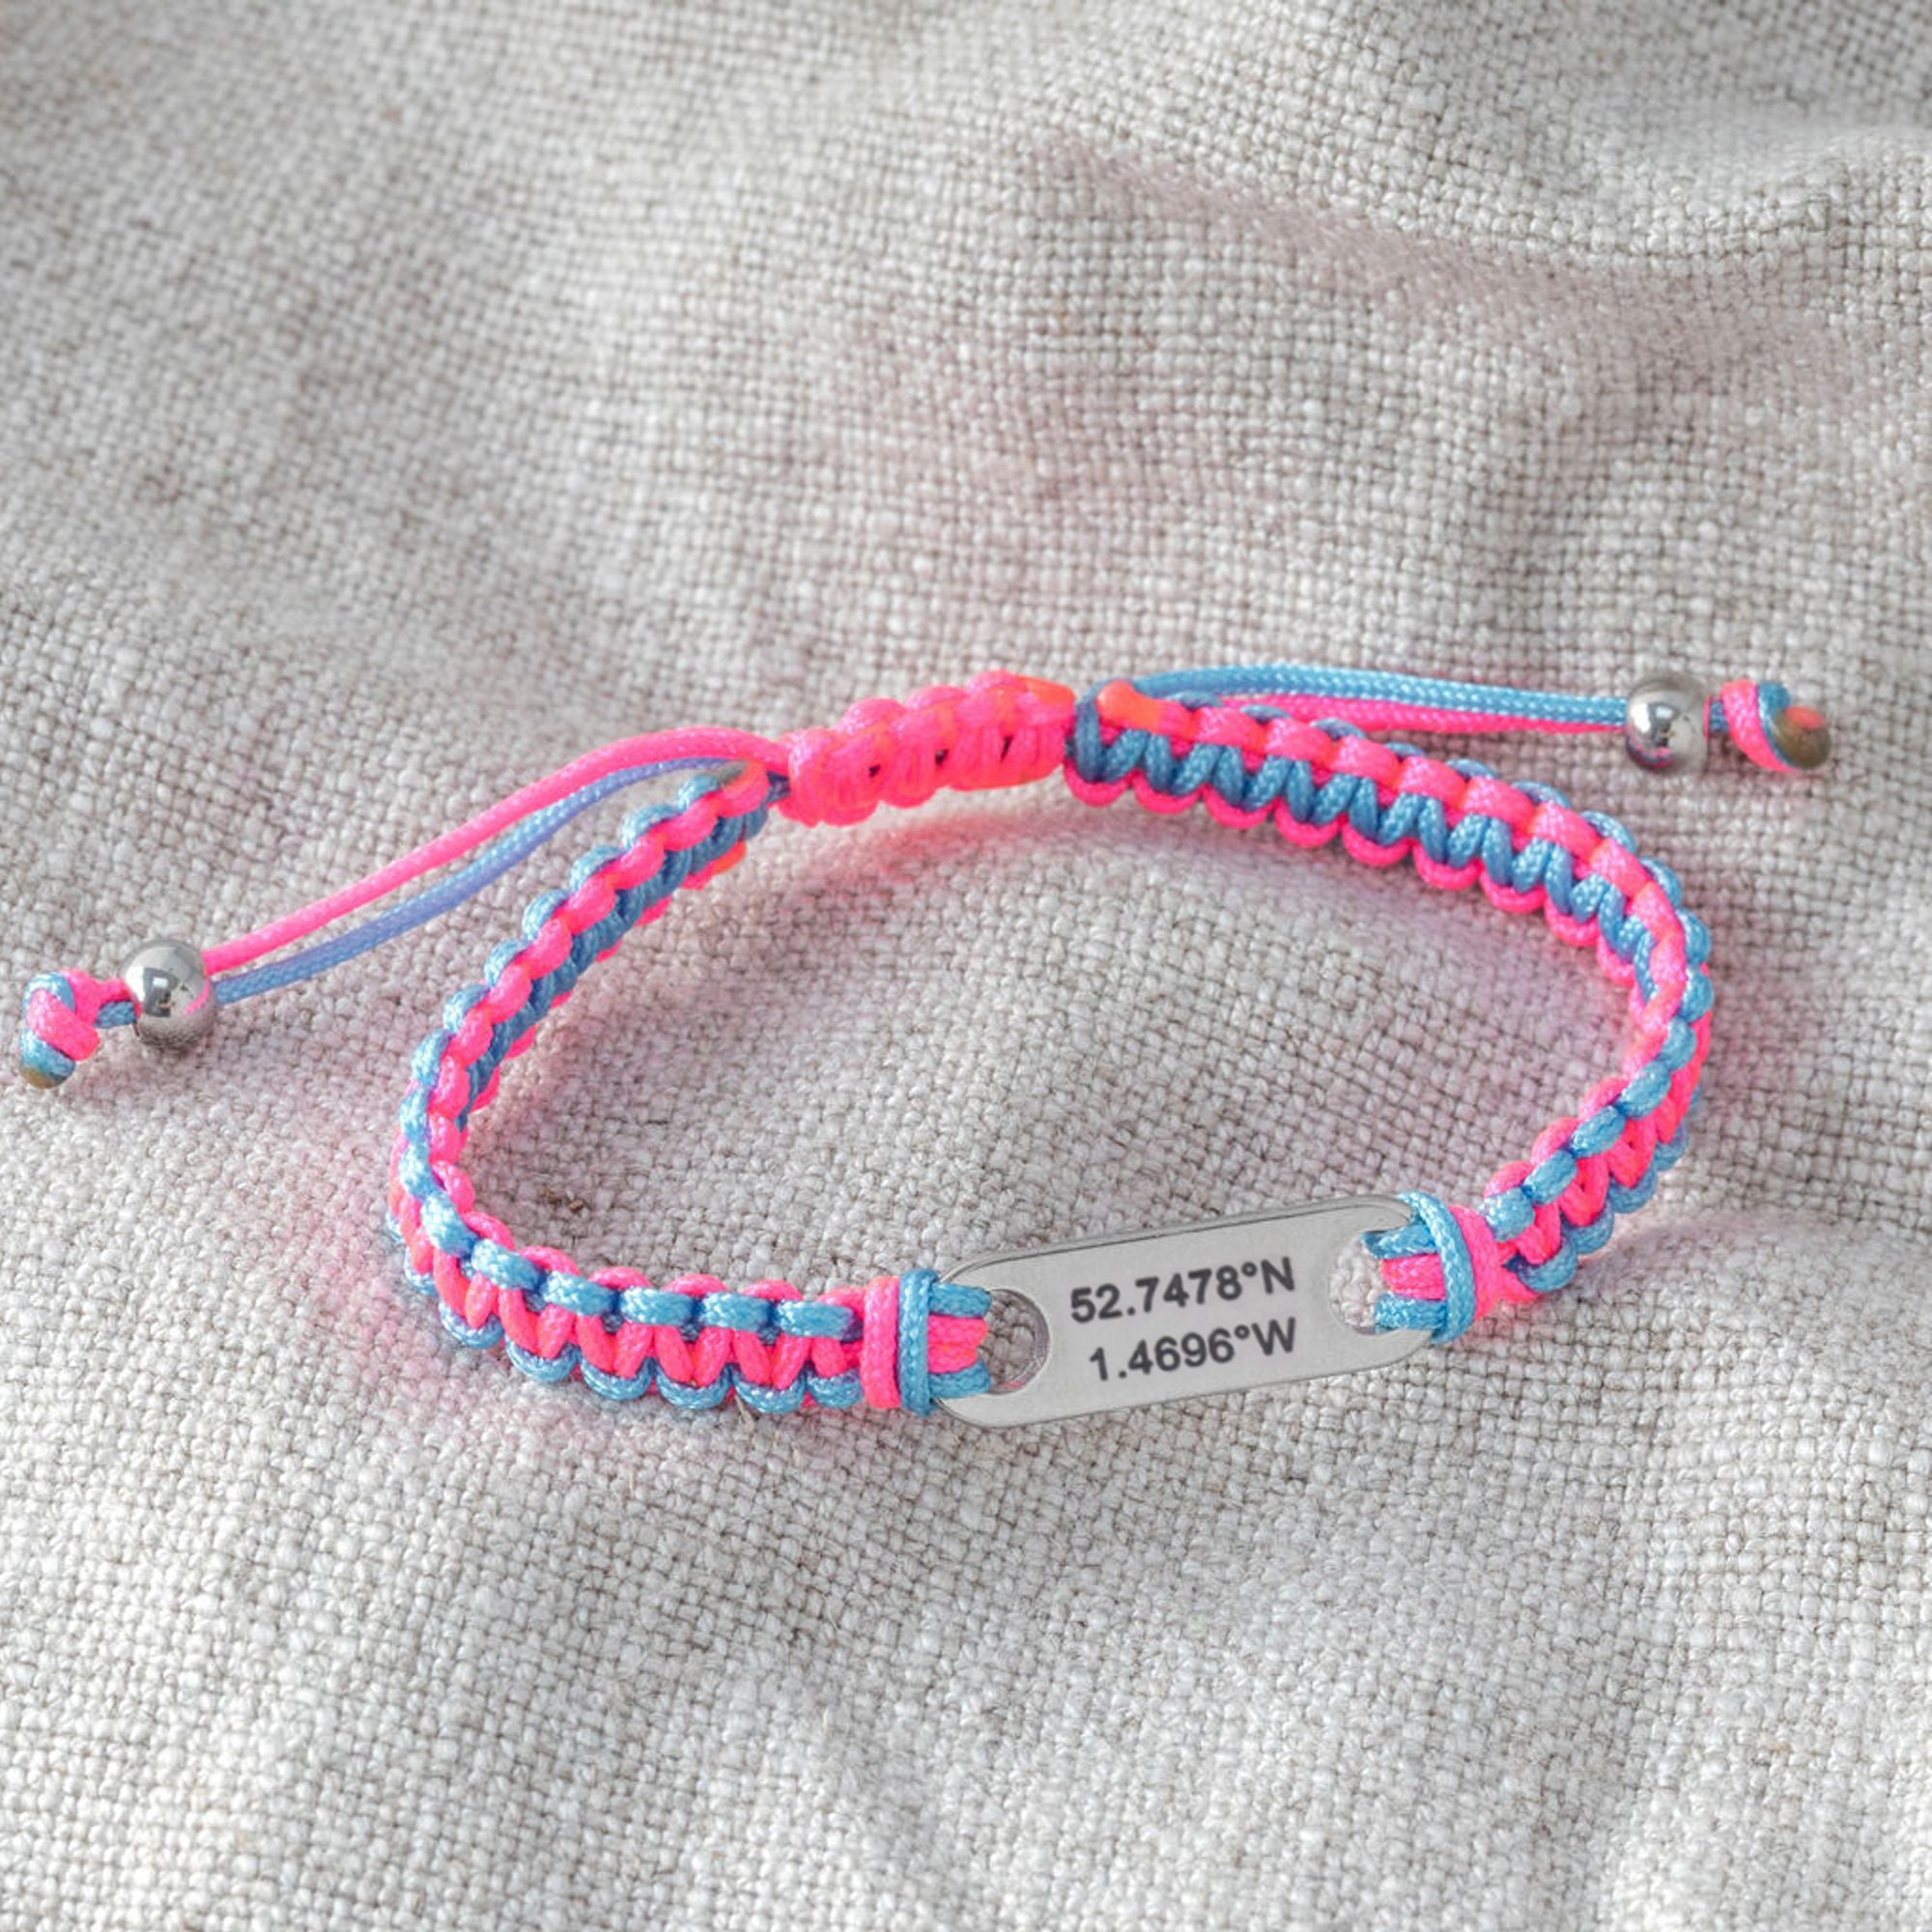 special coordinates couples bracelets gift pretty